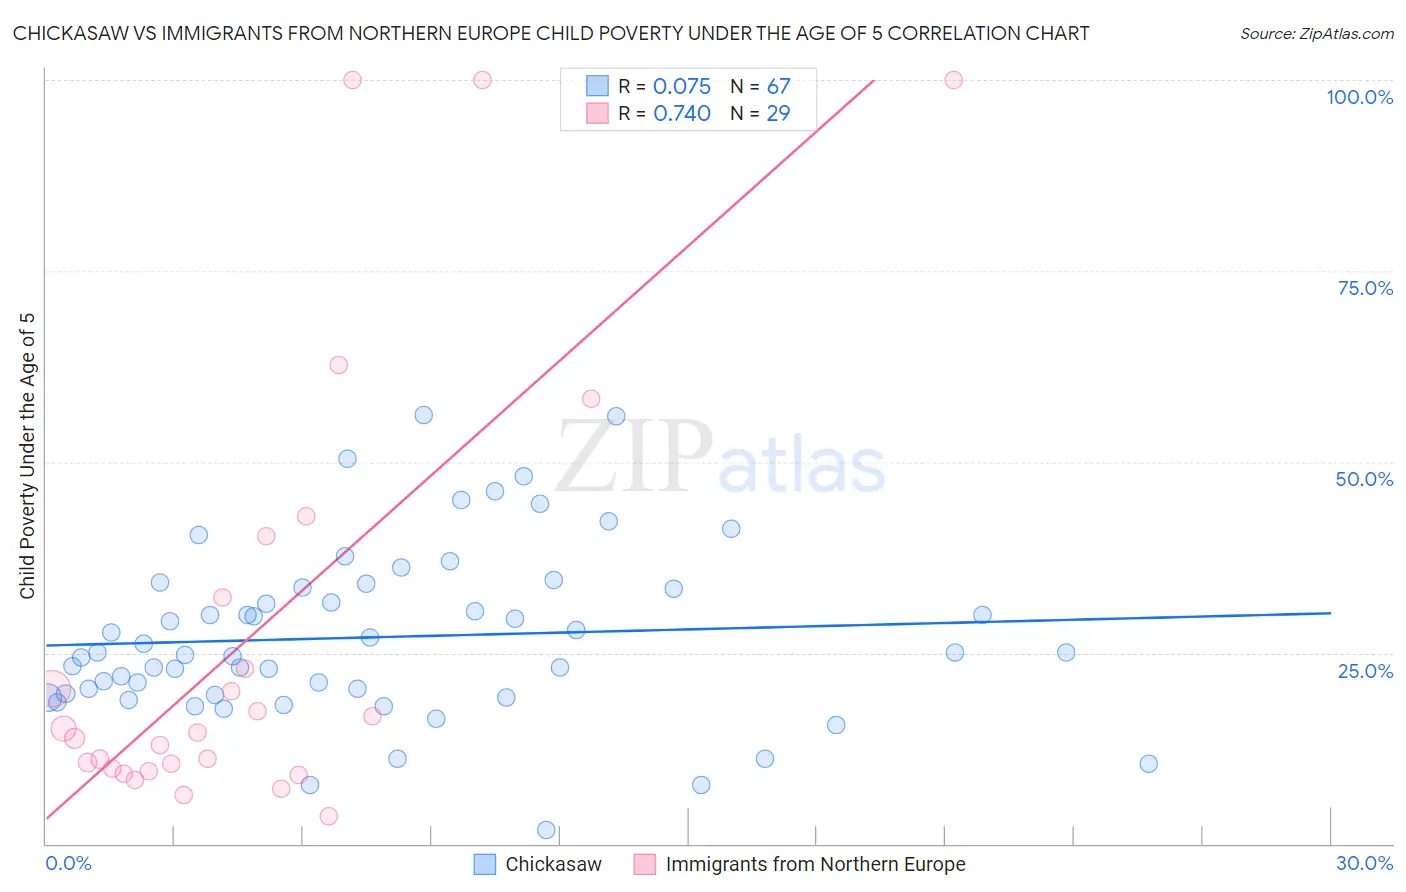 Chickasaw vs Immigrants from Northern Europe Child Poverty Under the Age of 5